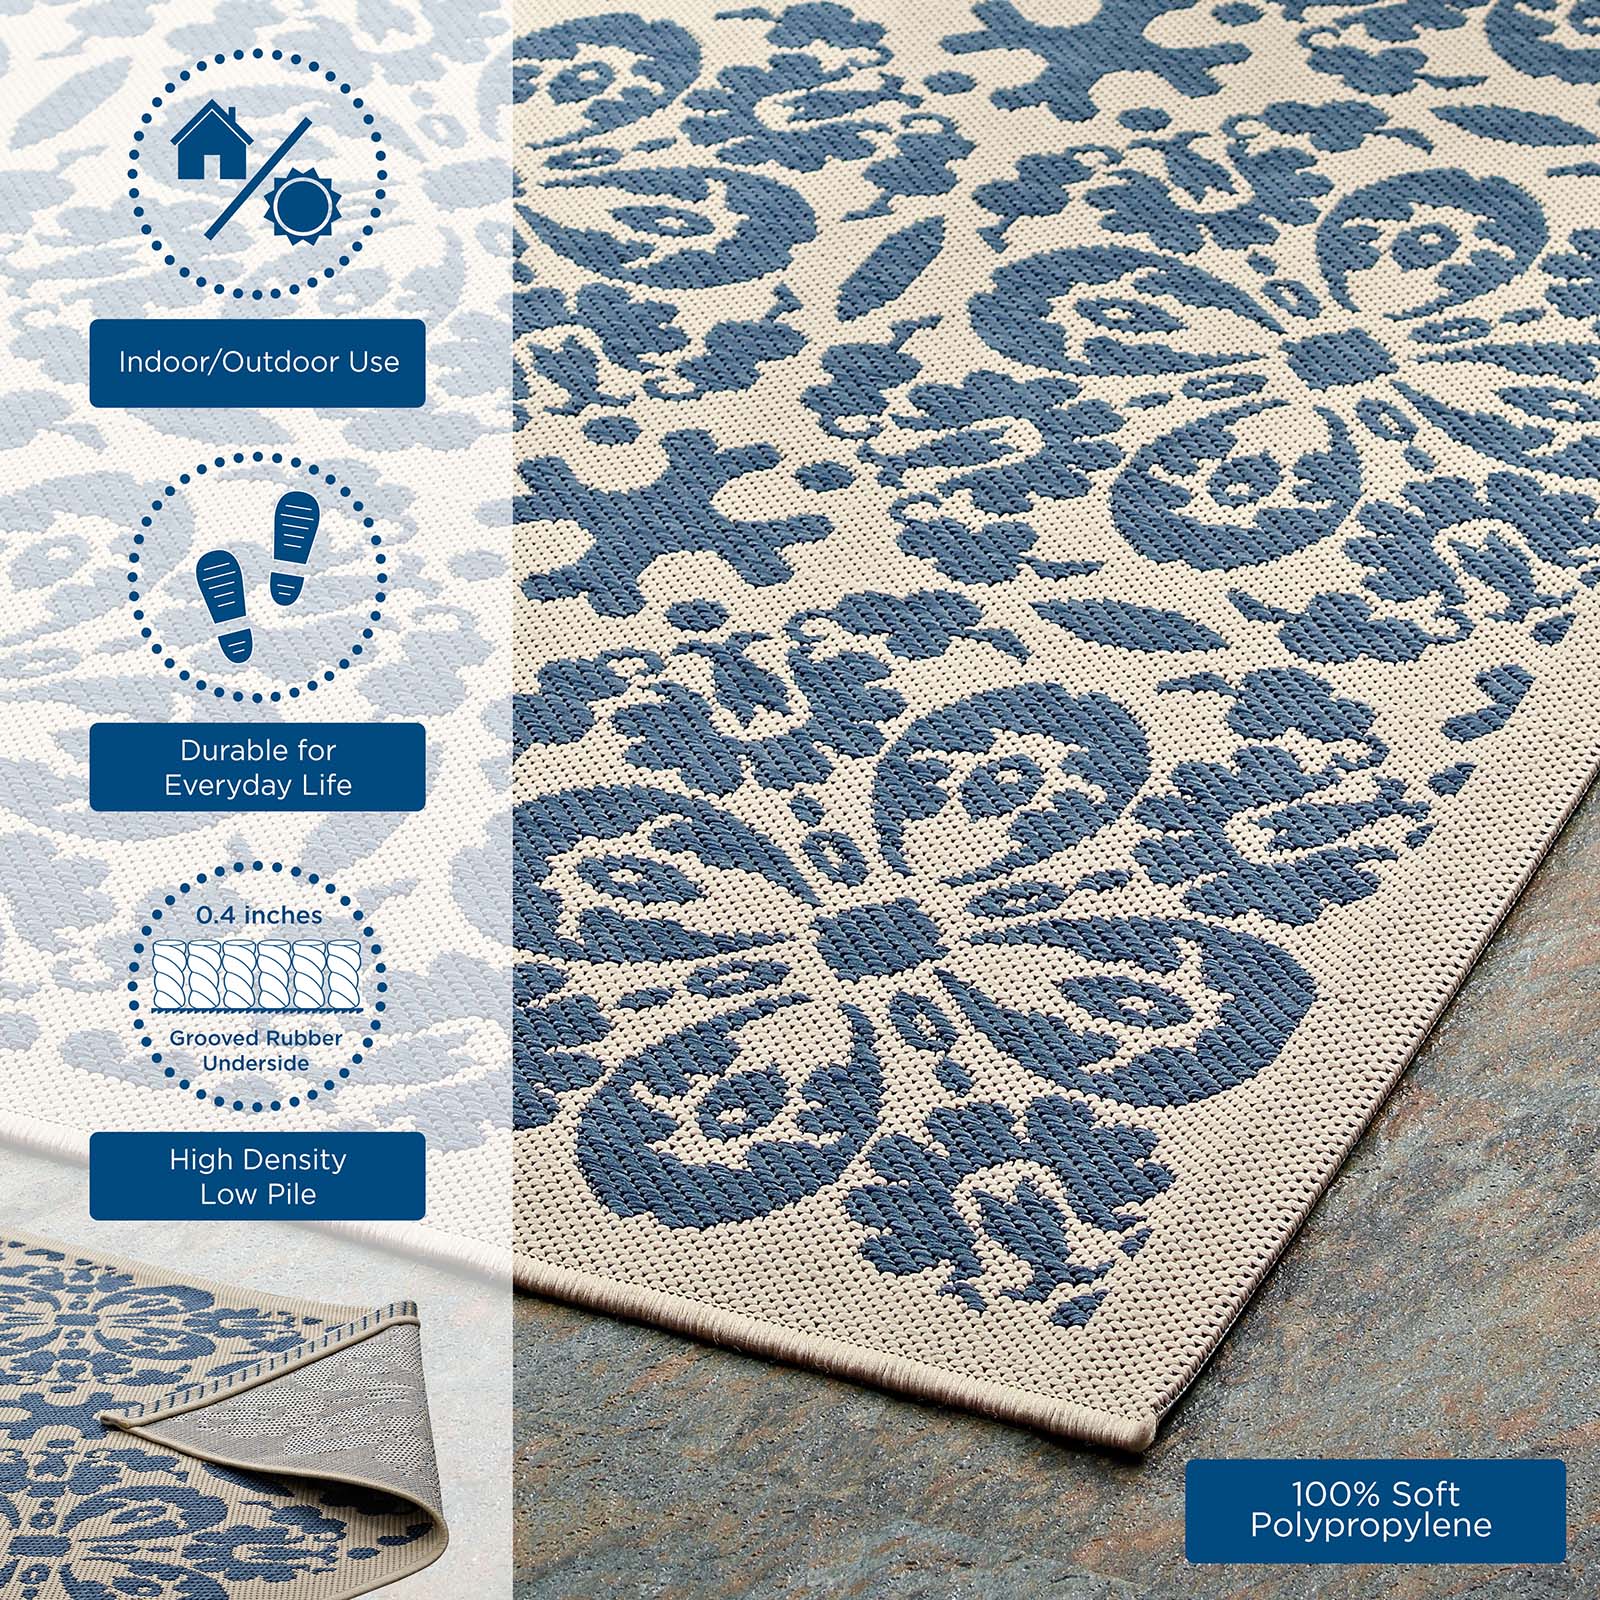 Modway Outdoor Rugs - Ariana Vintage Floral Trellis 9'x12' Outdoor Area Rug Blue & Beige